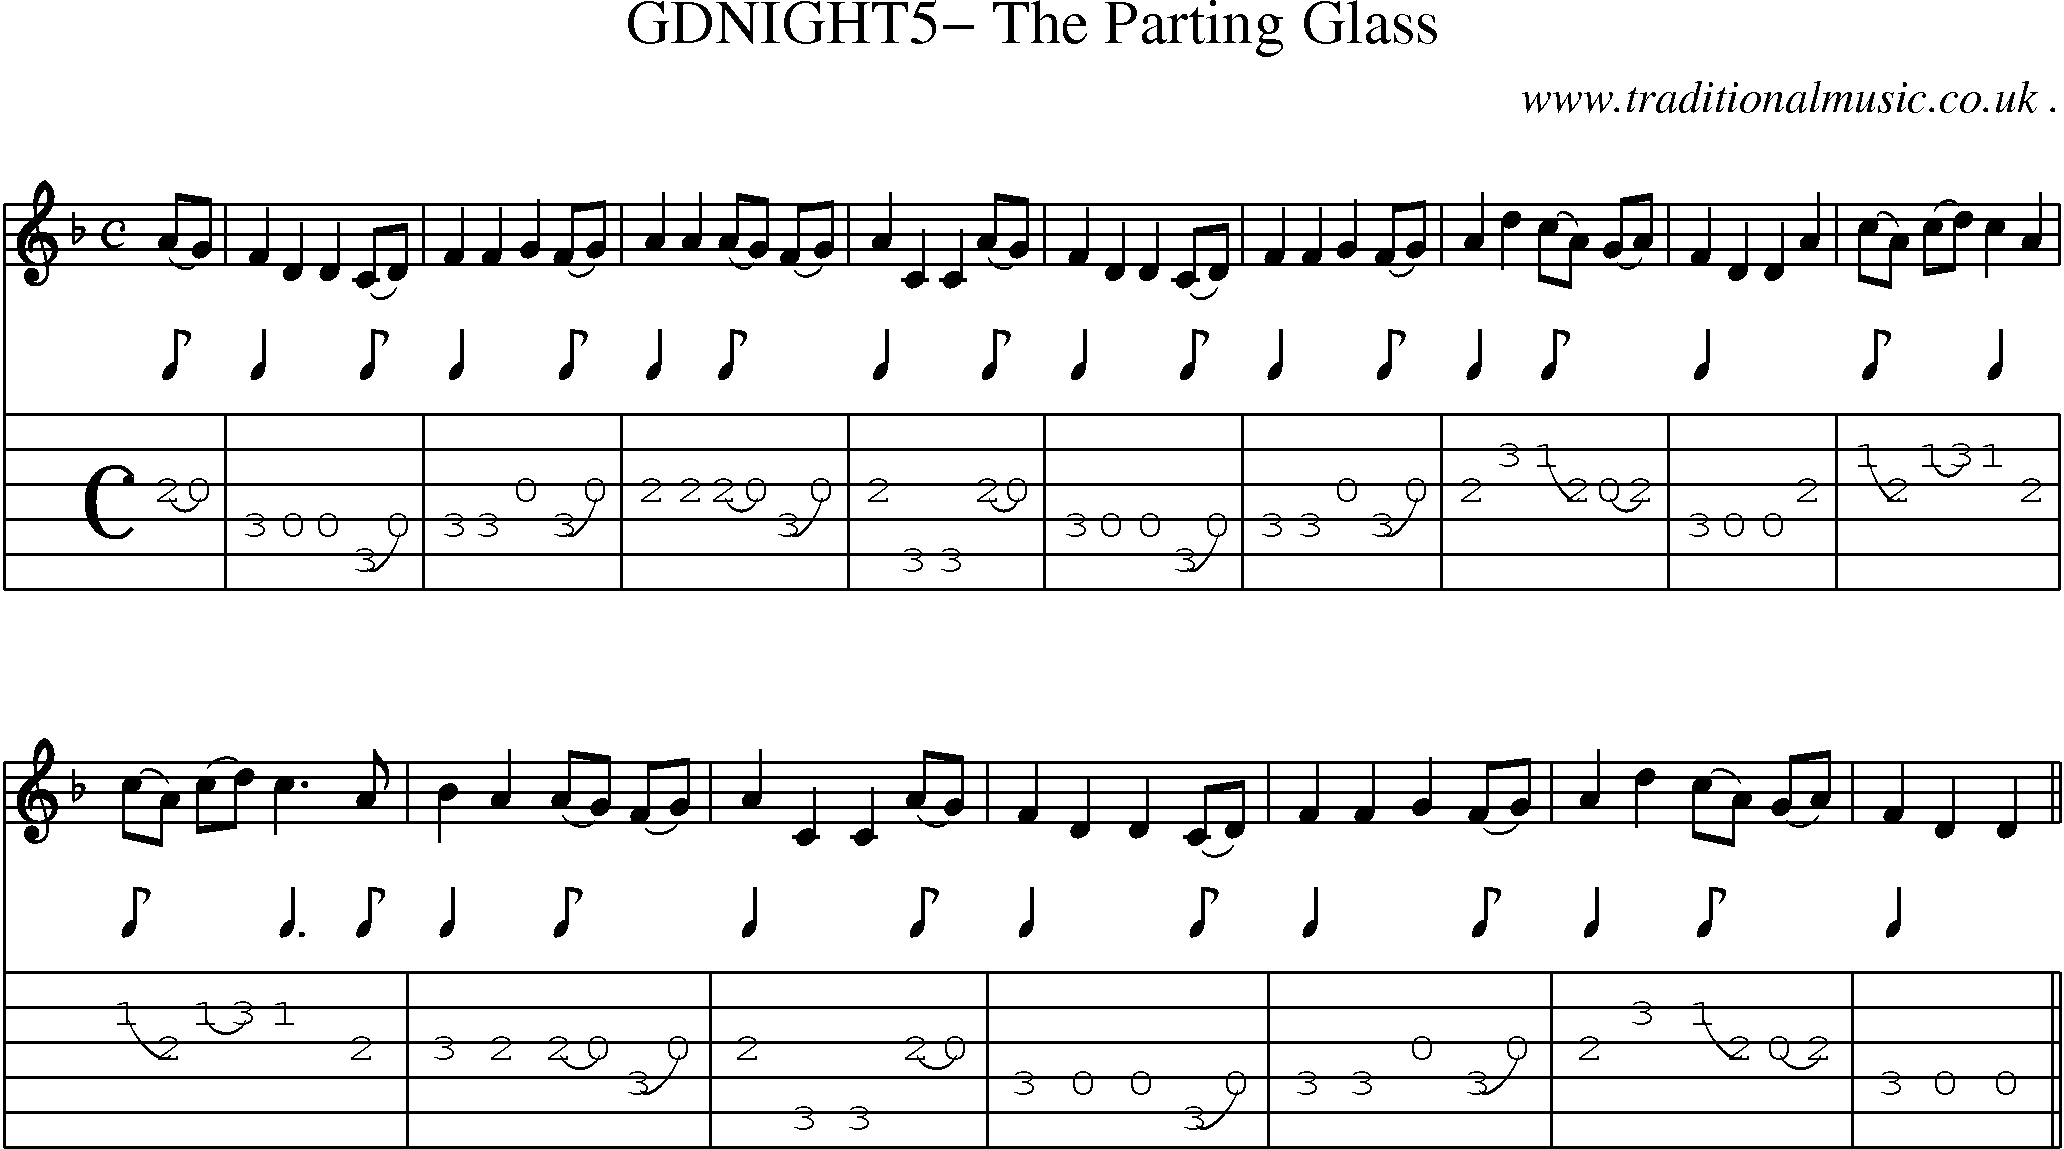 Sheet-Music and Guitar Tabs for Gdnight5 The Parting Glass